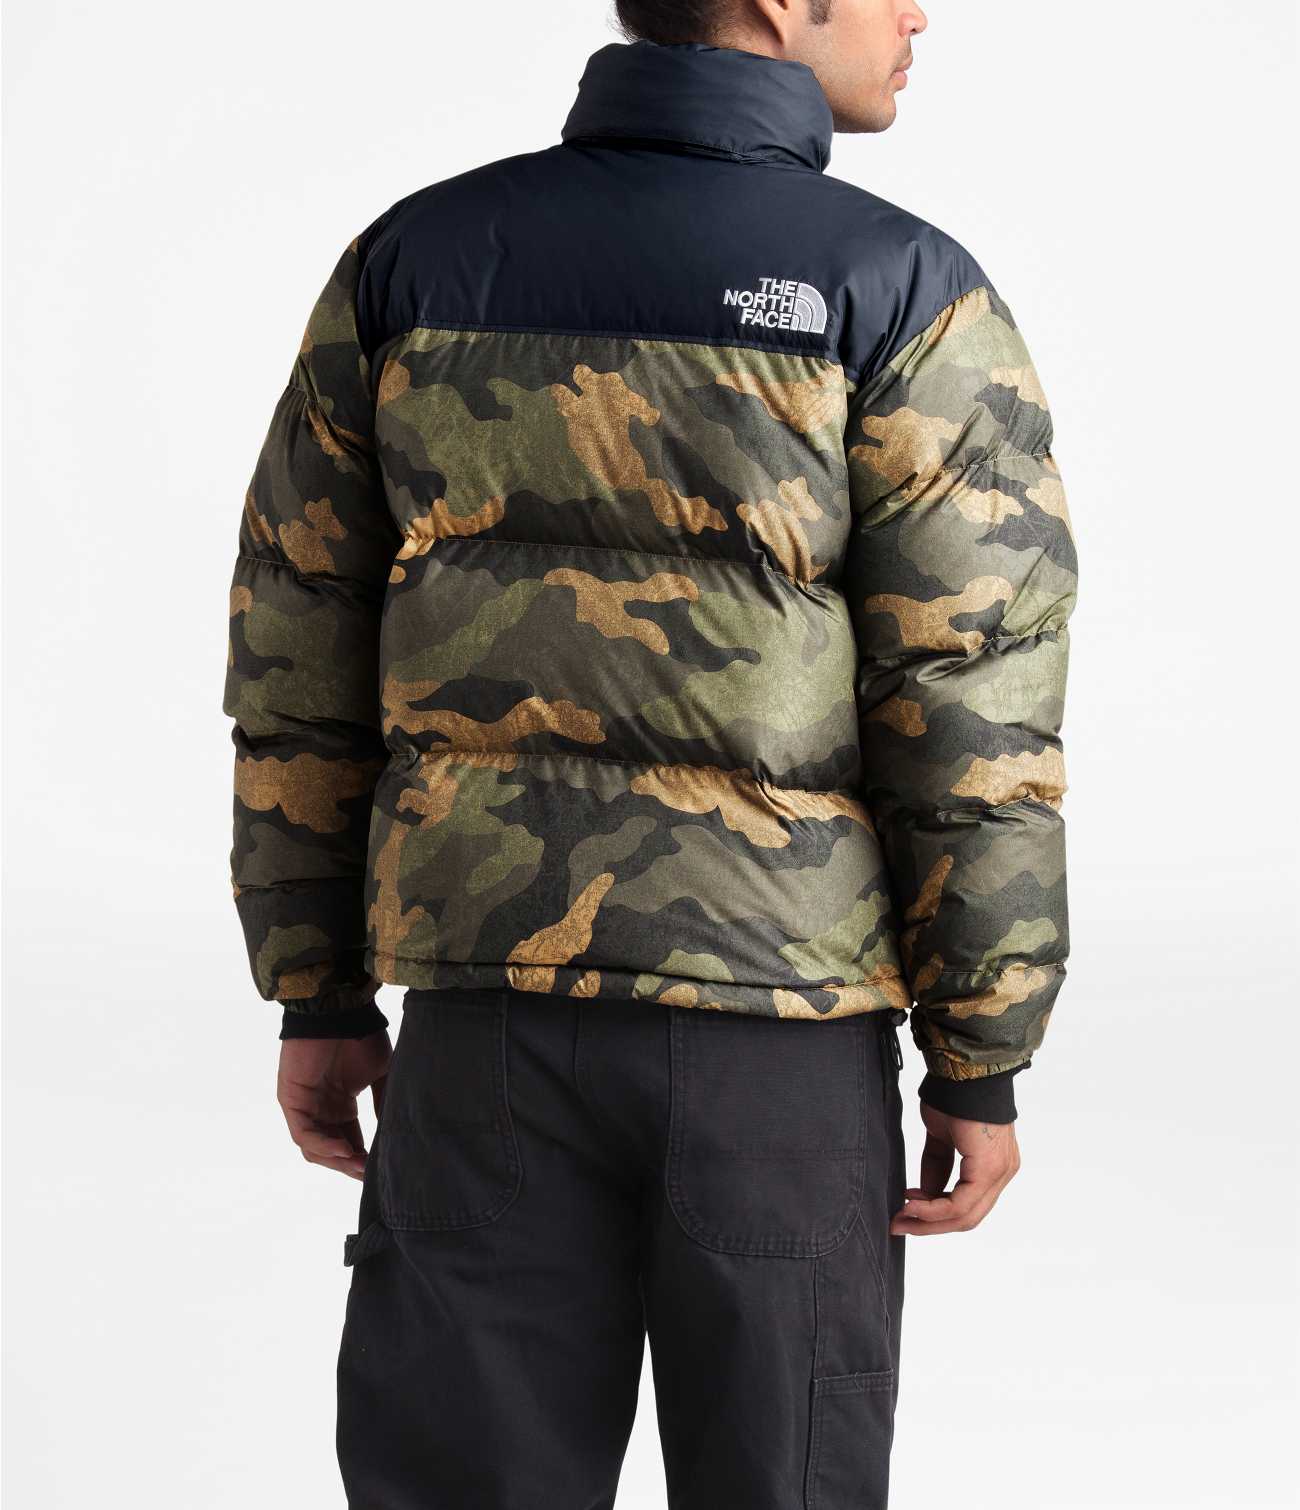 The North Face 1996 Retro Nuptse Jacket - Nf0a3c8dle4 - Sneakersnstuff  (SNS)